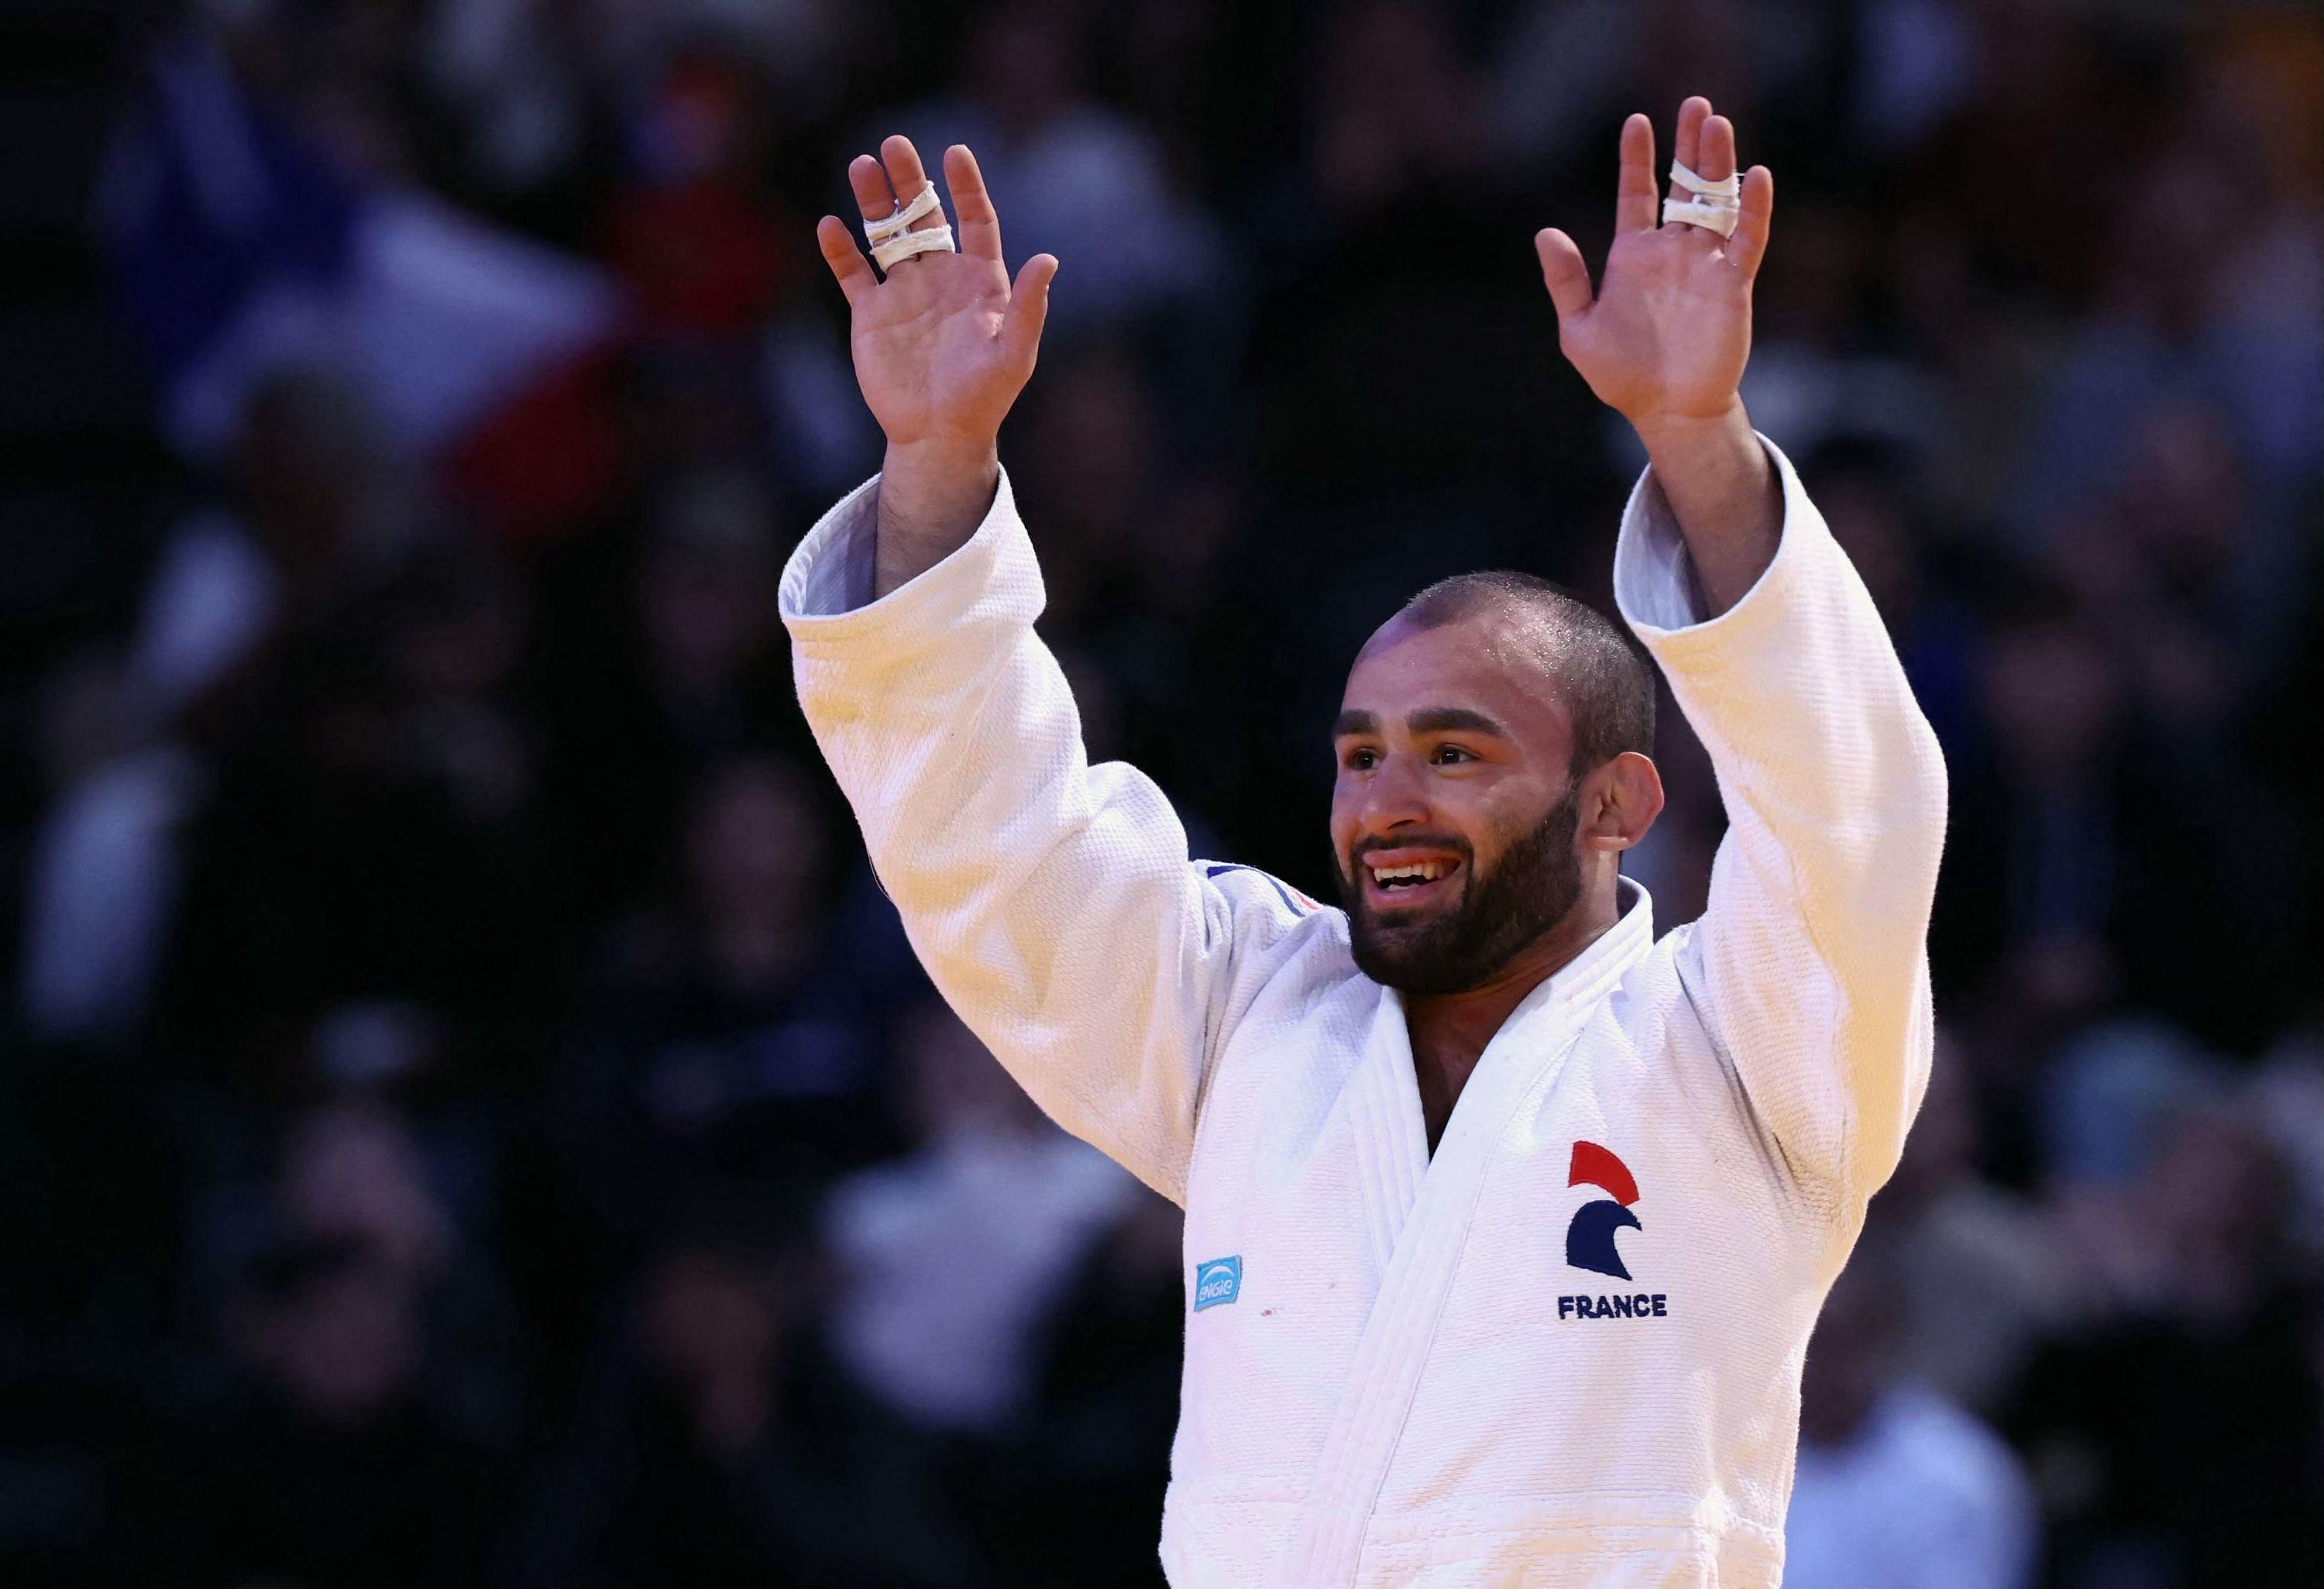 Luka Mkheidze, crowned at the Paris Grand Slam: “We must continue to work for the Olympic Games”